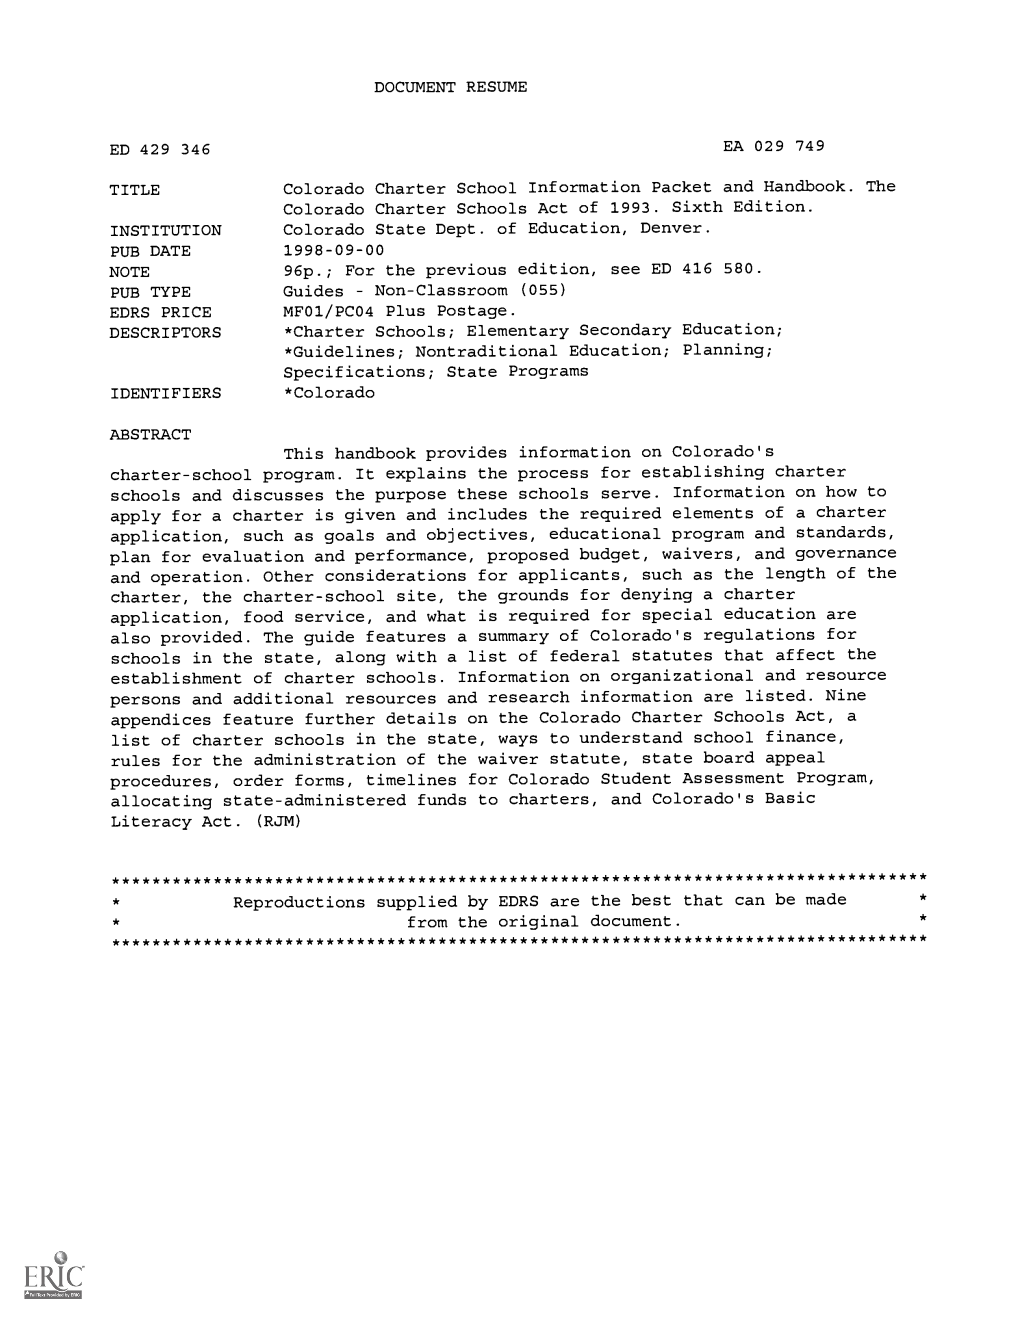 Colorado Charter School Information Packet and Handbook. the Colorado Charter Schools Act of 1993